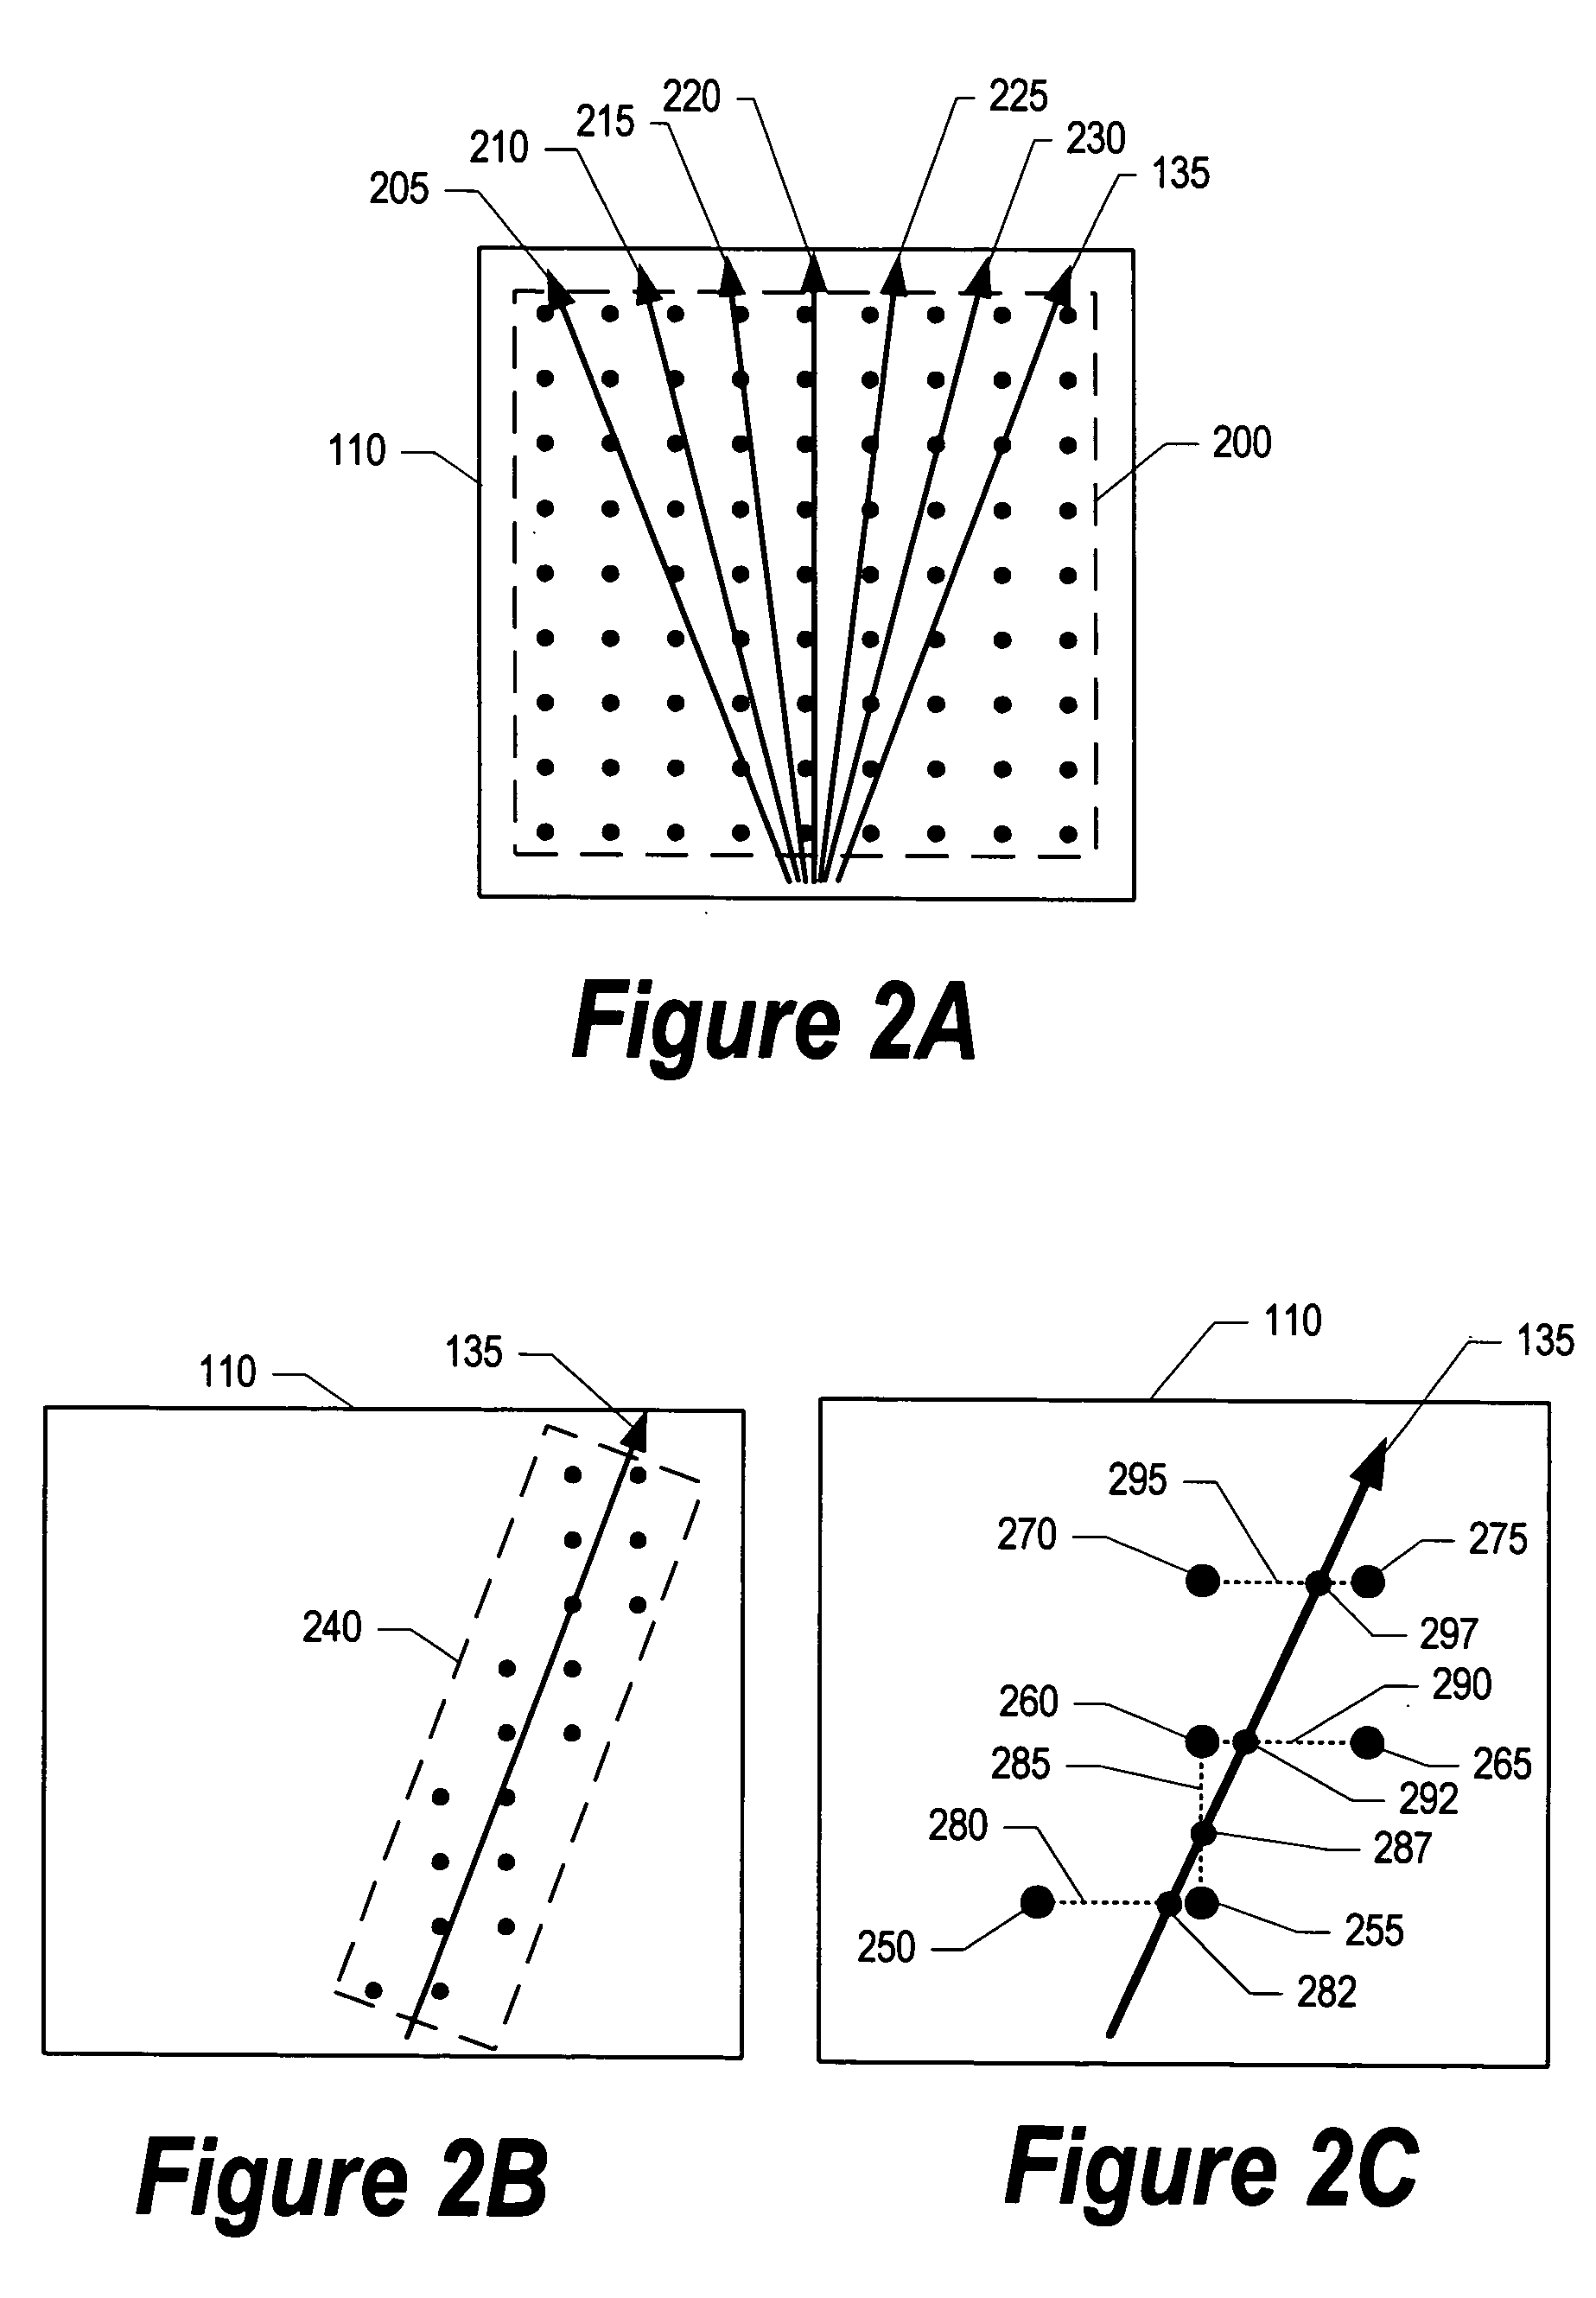 System and method for terrain rendering using a limited memory footprint